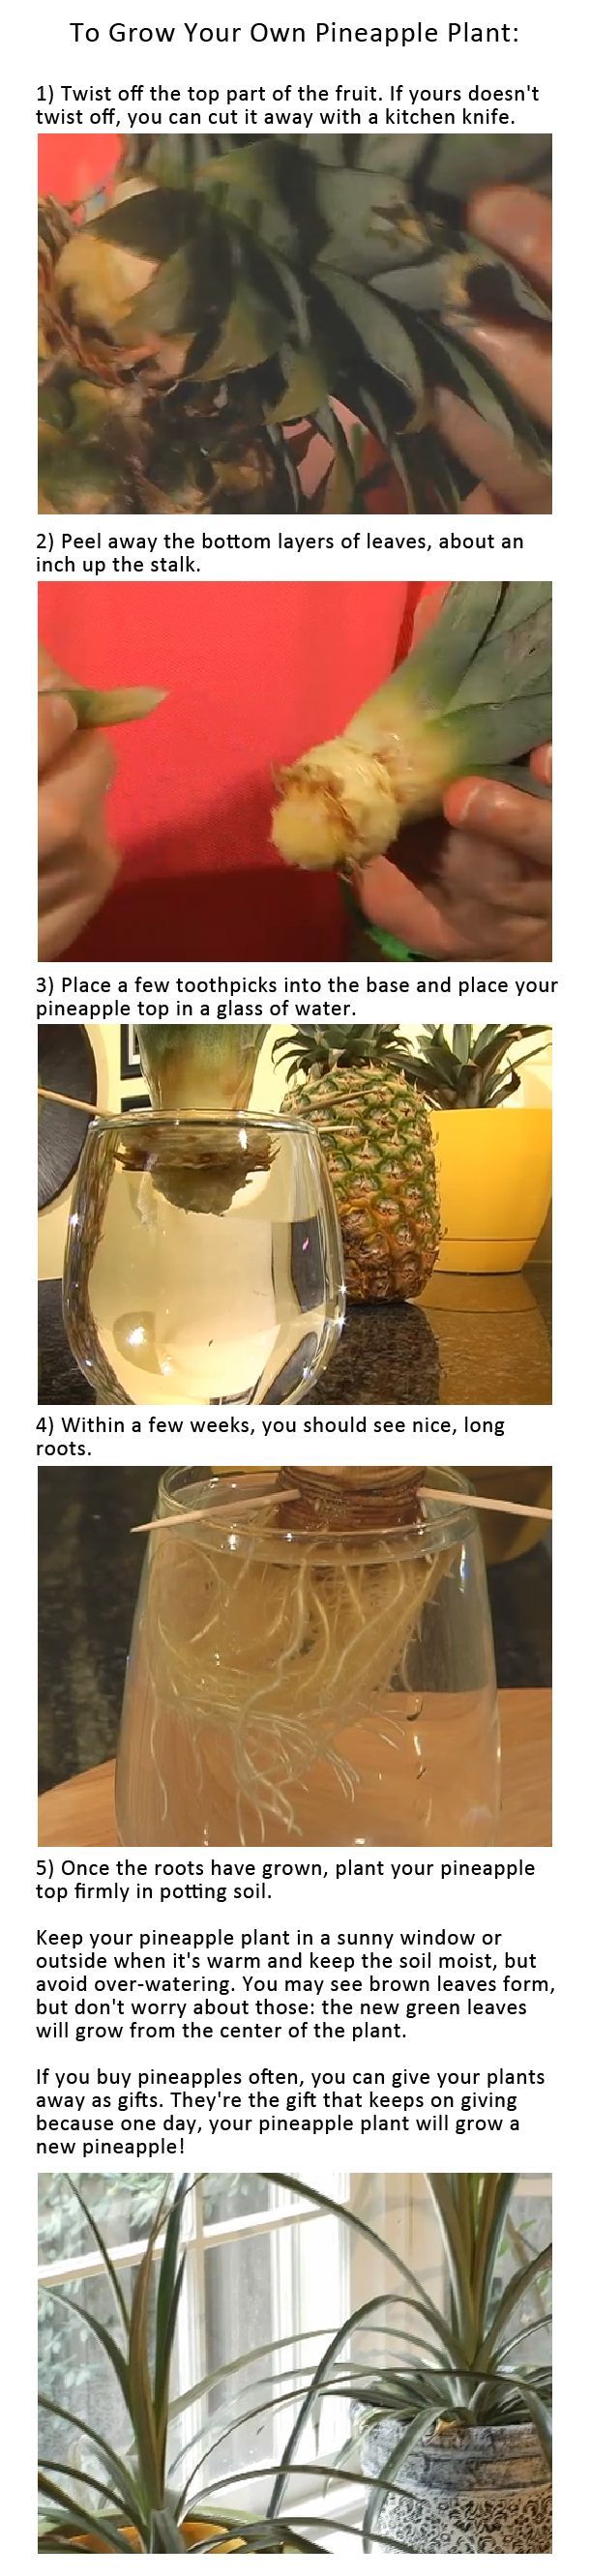 Grow Your Own Pineapple Plant